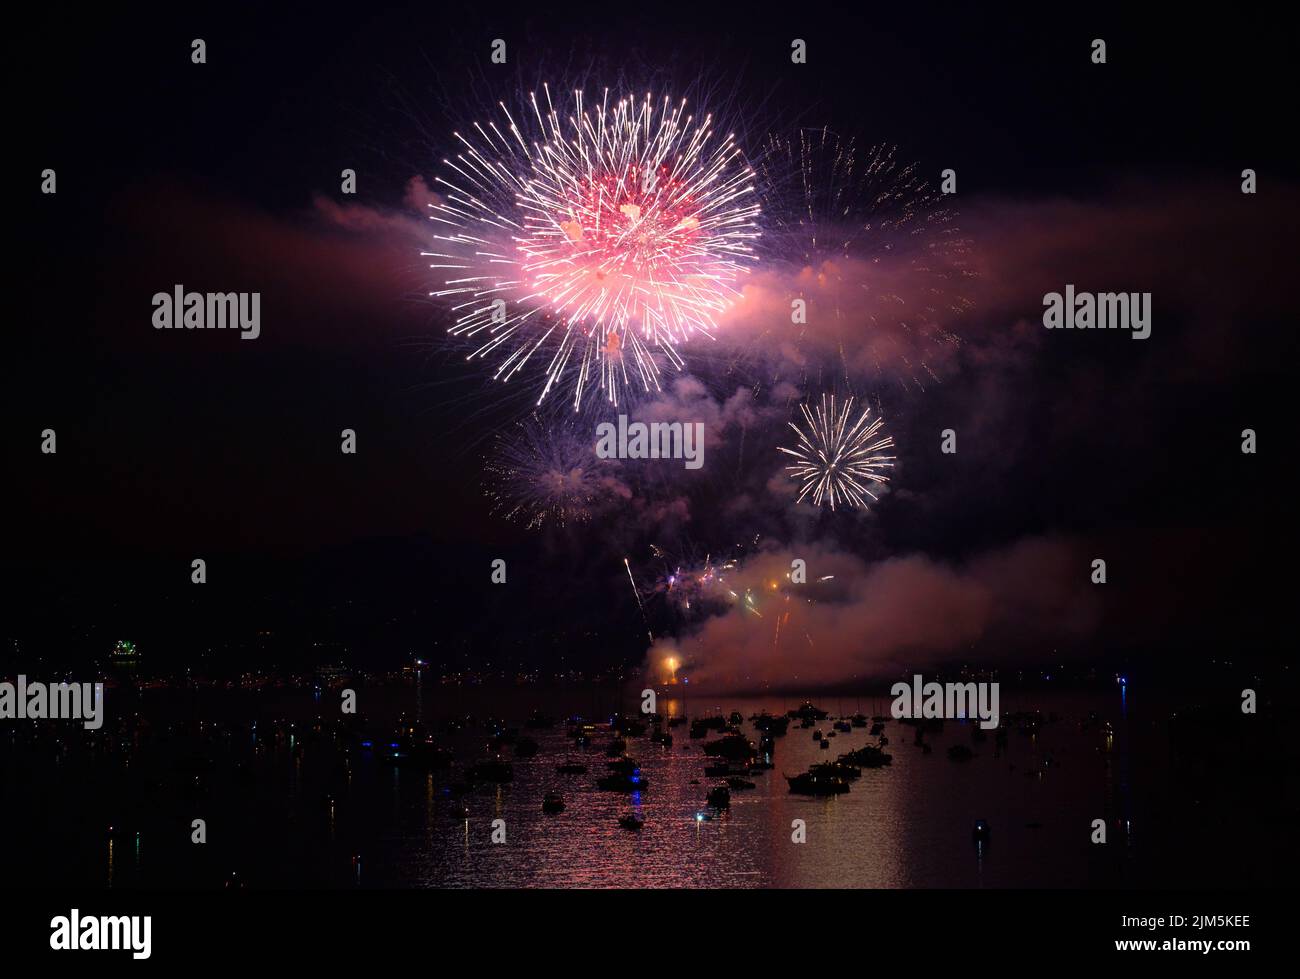 Summer Fireworks Over English Bay Vancouver. Summer fireworks display over English Bay, Vancouver, BC. Stock Photo